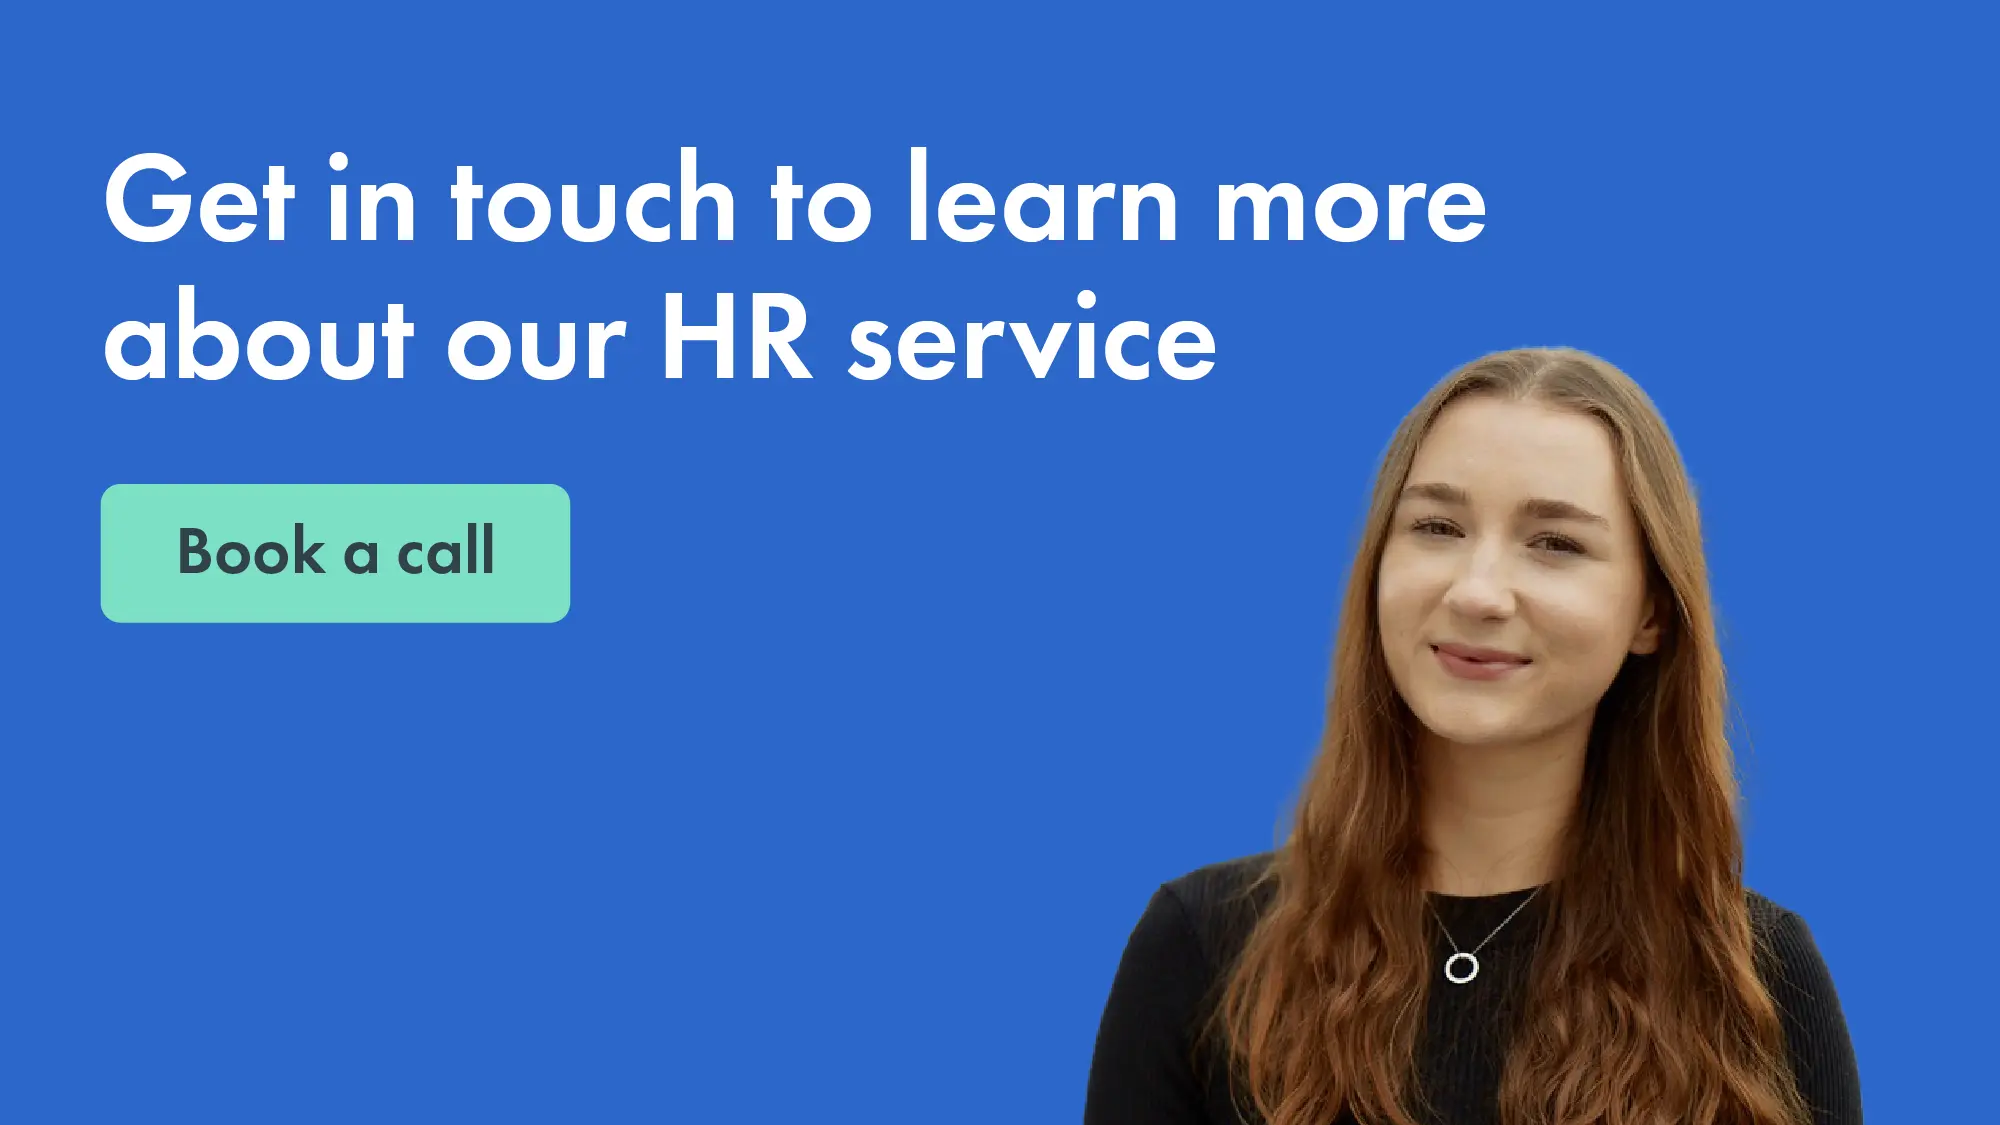 Book a call to find out more about our HR Advice service